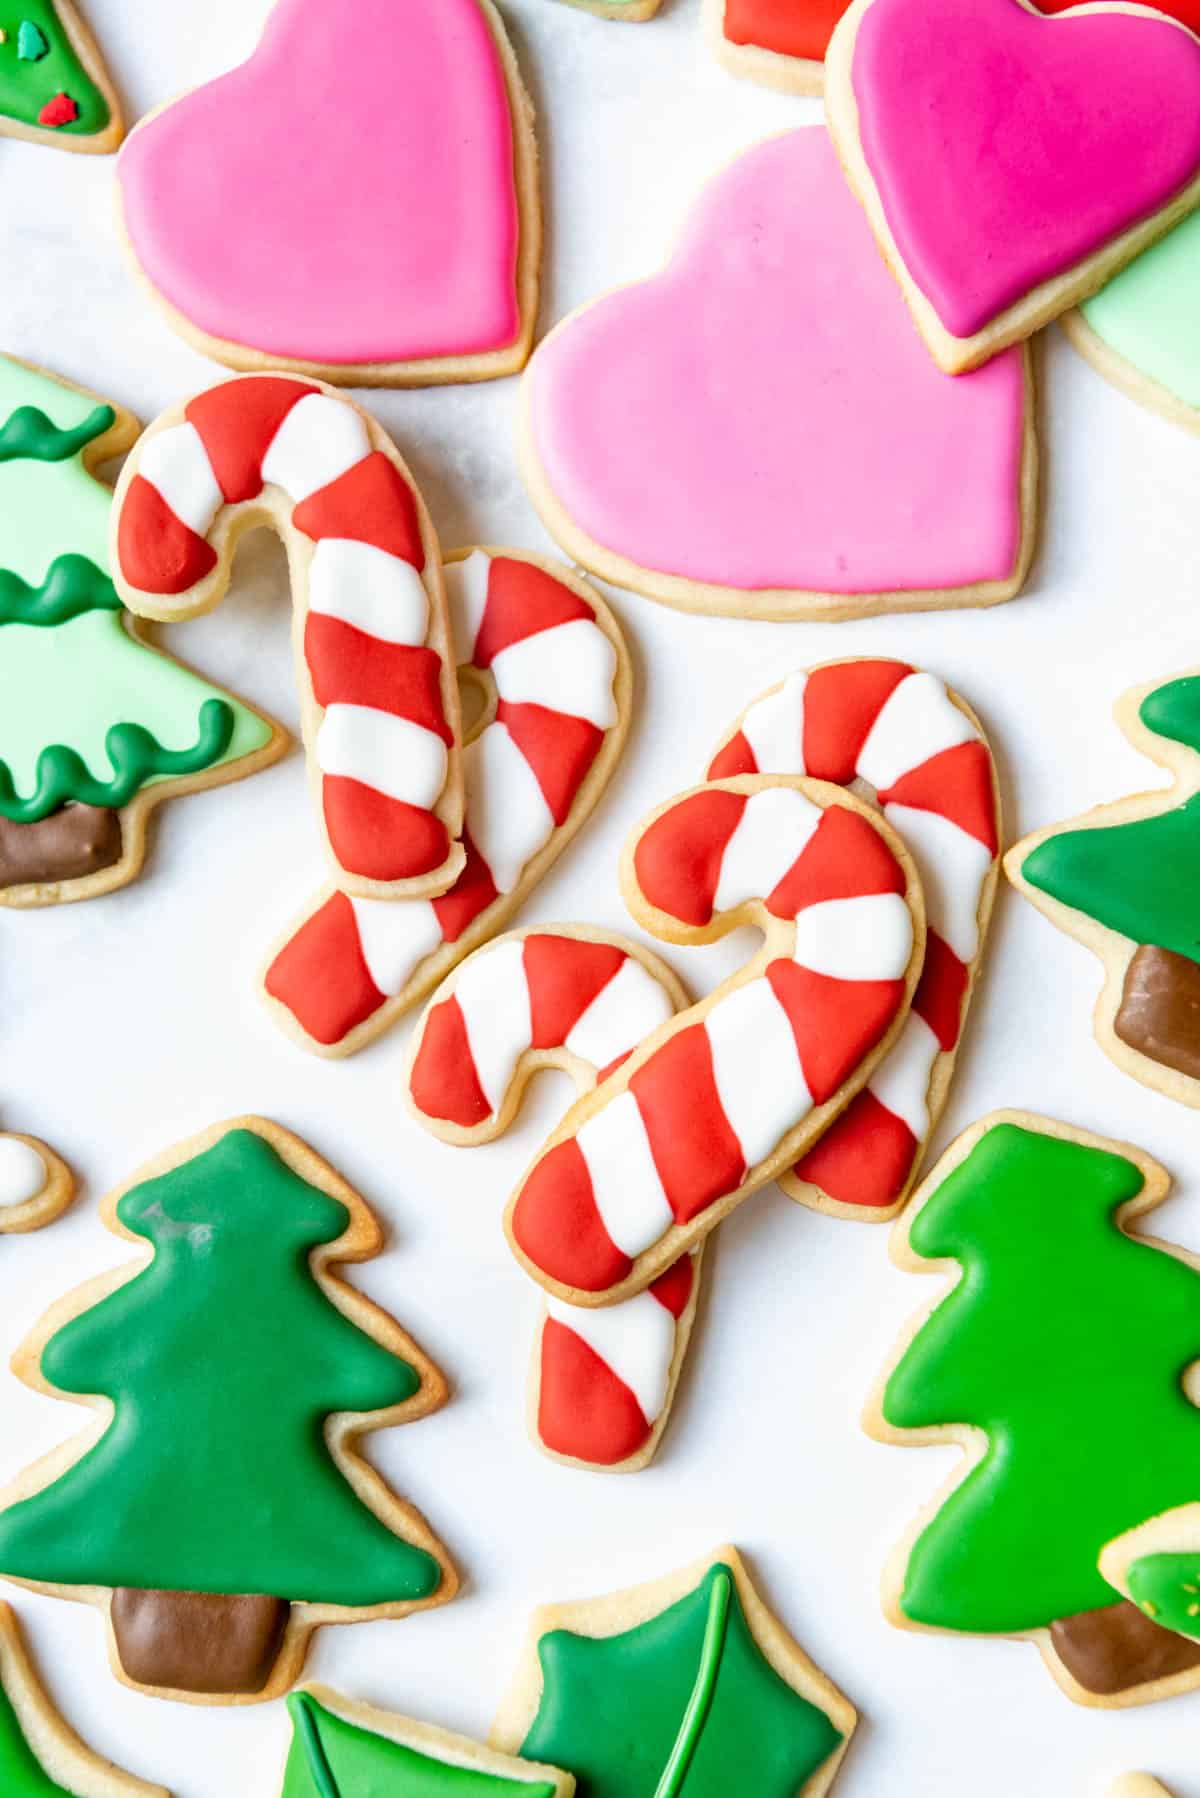 Candy cane striped sugar cookies decorated with royal icing.